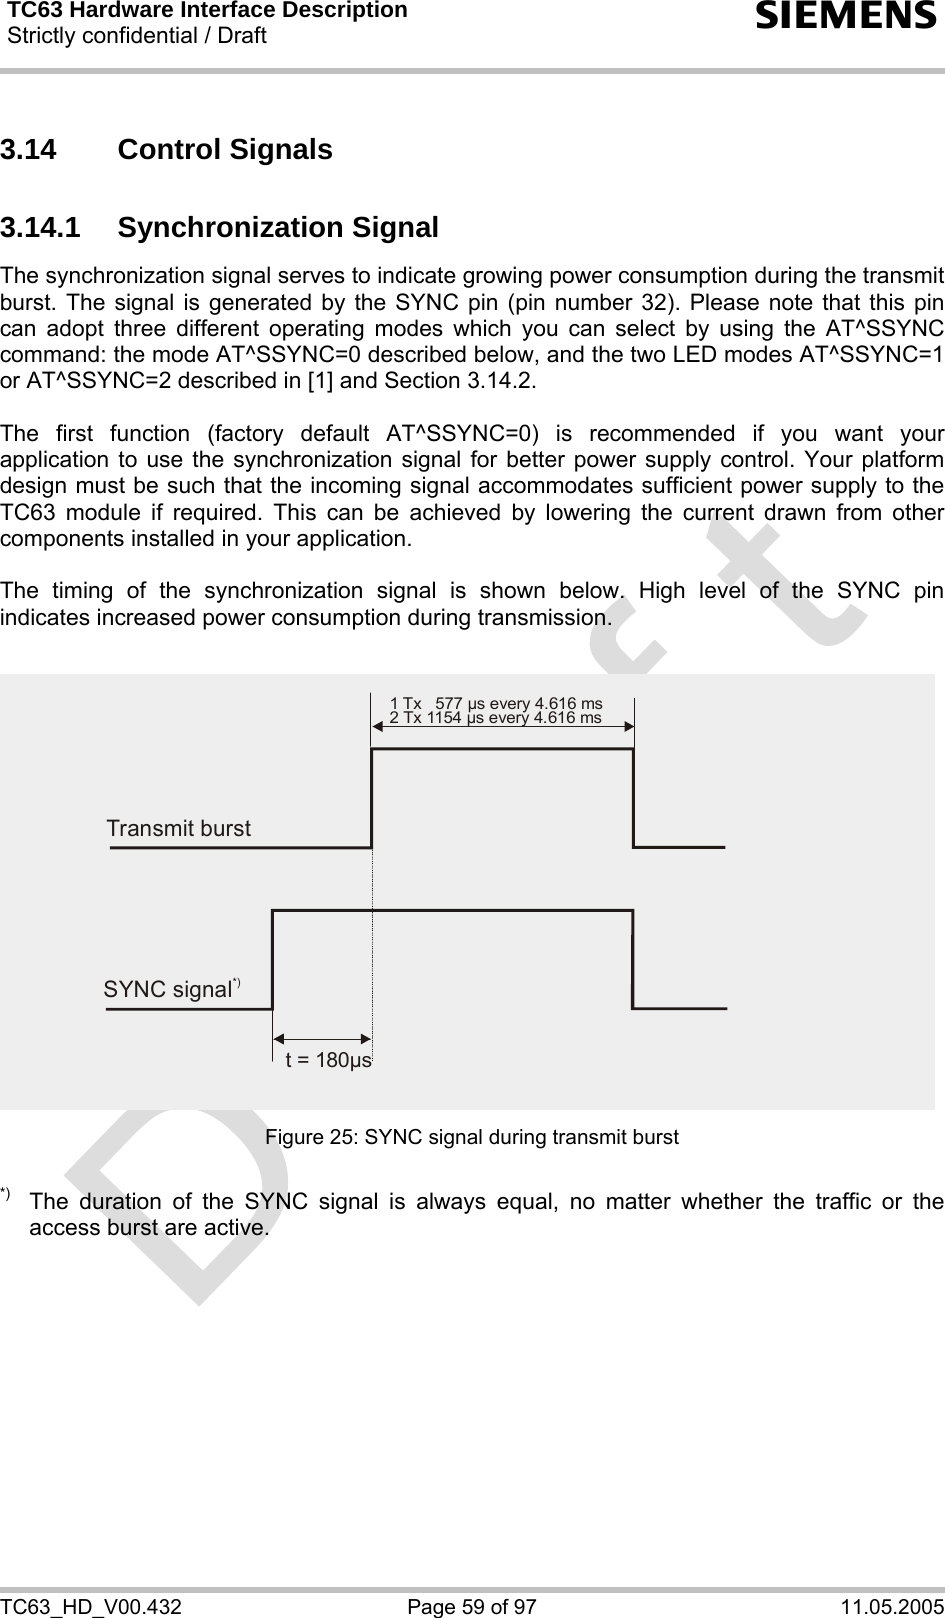 TC63 Hardware Interface Description Strictly confidential / Draft  s TC63_HD_V00.432  Page 59 of 97  11.05.2005 3.14 Control Signals 3.14.1 Synchronization Signal The synchronization signal serves to indicate growing power consumption during the transmit burst. The signal is generated by the SYNC pin (pin number 32). Please note that this pin can adopt three different operating modes which you can select by using the AT^SSYNC command: the mode AT^SSYNC=0 described below, and the two LED modes AT^SSYNC=1 or AT^SSYNC=2 described in [1] and Section 3.14.2.  The first function (factory default AT^SSYNC=0) is recommended if you want your application to use the synchronization signal for better power supply control. Your platform design must be such that the incoming signal accommodates sufficient power supply to the TC63 module if required. This can be achieved by lowering the current drawn from other components installed in your application.   The timing of the synchronization signal is shown below. High level of the SYNC pin indicates increased power consumption during transmission.  Figure 25: SYNC signal during transmit burst  *)  The duration of the SYNC signal is always equal, no matter whether the traffic or the access burst are active.  Transmit burst1 Tx   577 µs every 4.616 ms2 Tx 1154 µs every 4.616 msSYNC signal*)t = 180 sµ